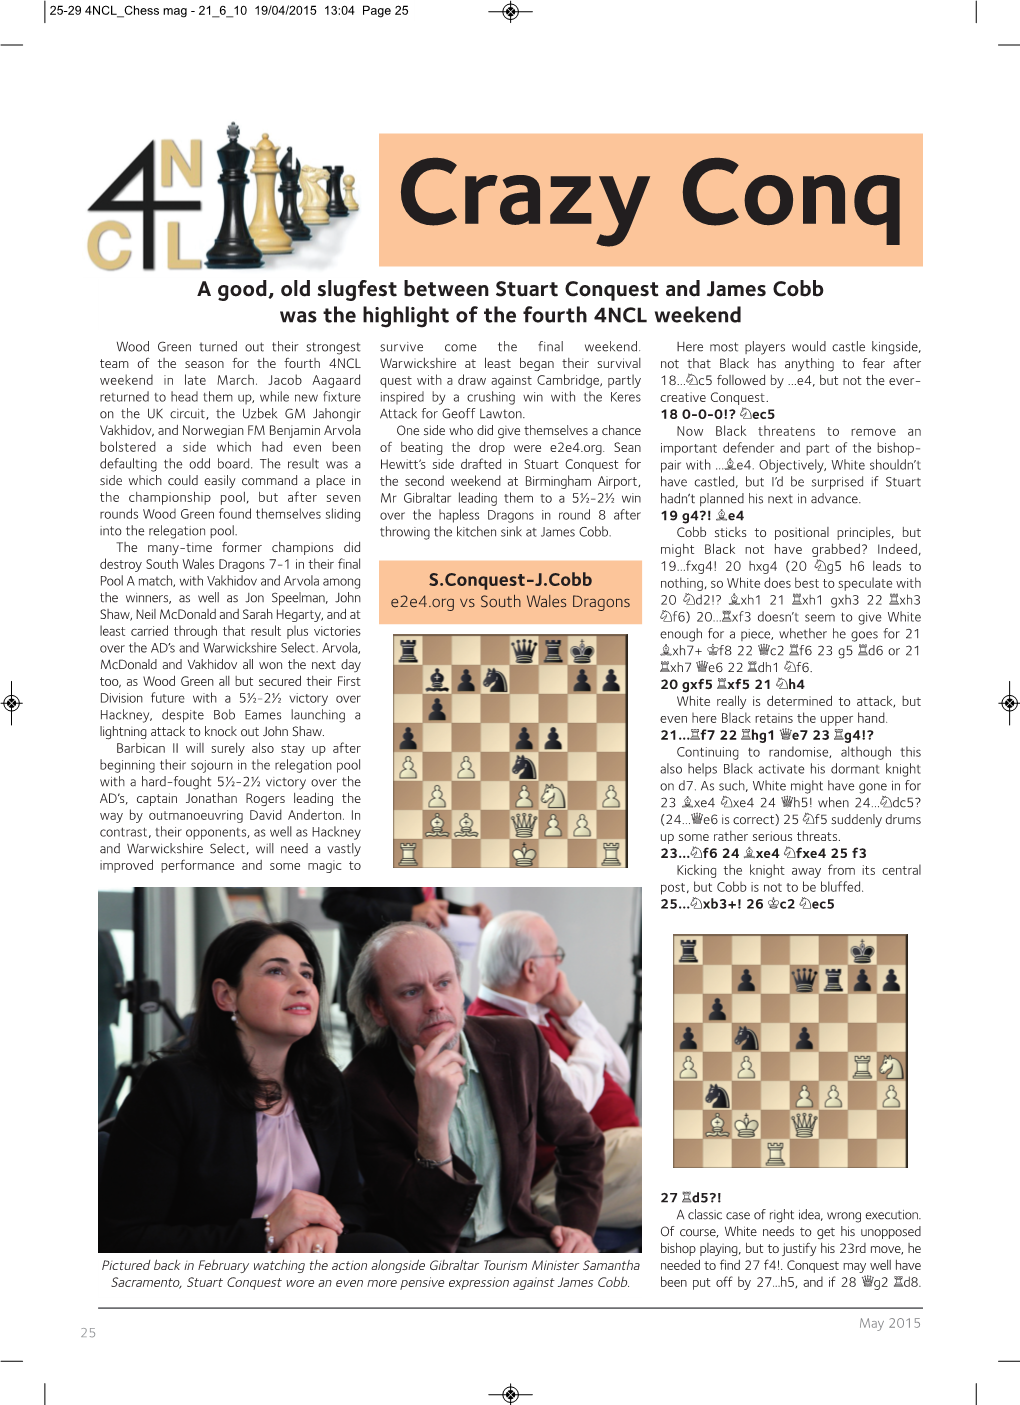 Chess Mag - 21 6 10 19/04/2015 13:04 Page 25